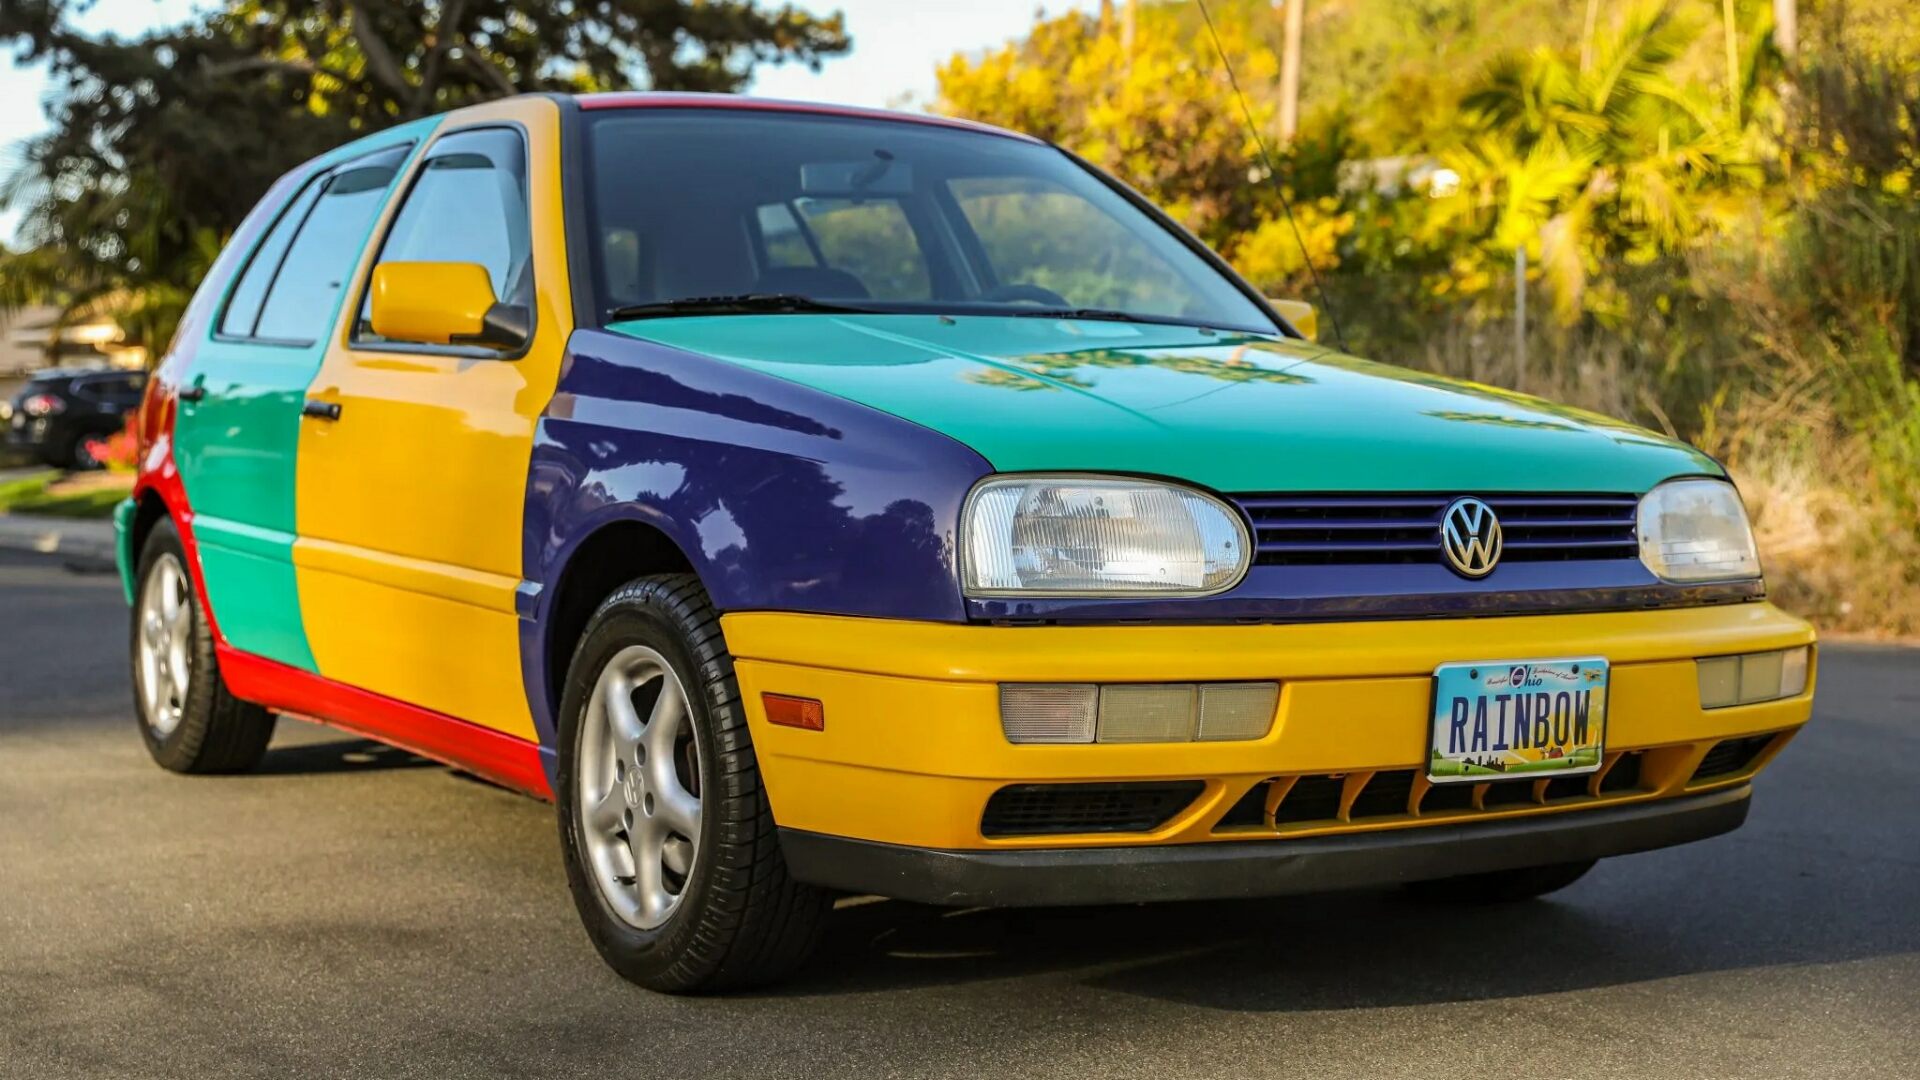 The 1996 Volkswagen Golf Harlequin Thats On Auction (Credits Bring A Trailer)